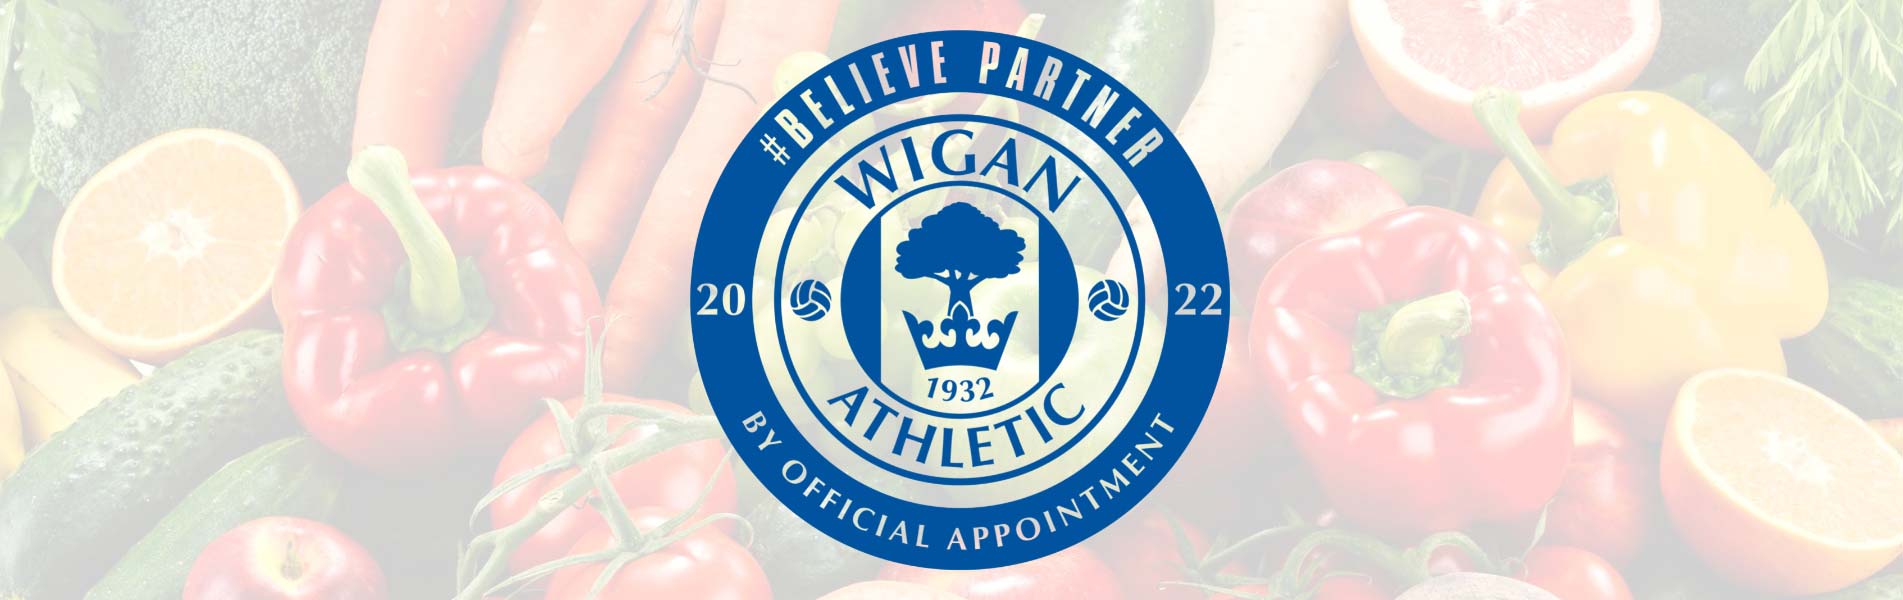 Wigan Athletic Believe Partner - By Official Appointment